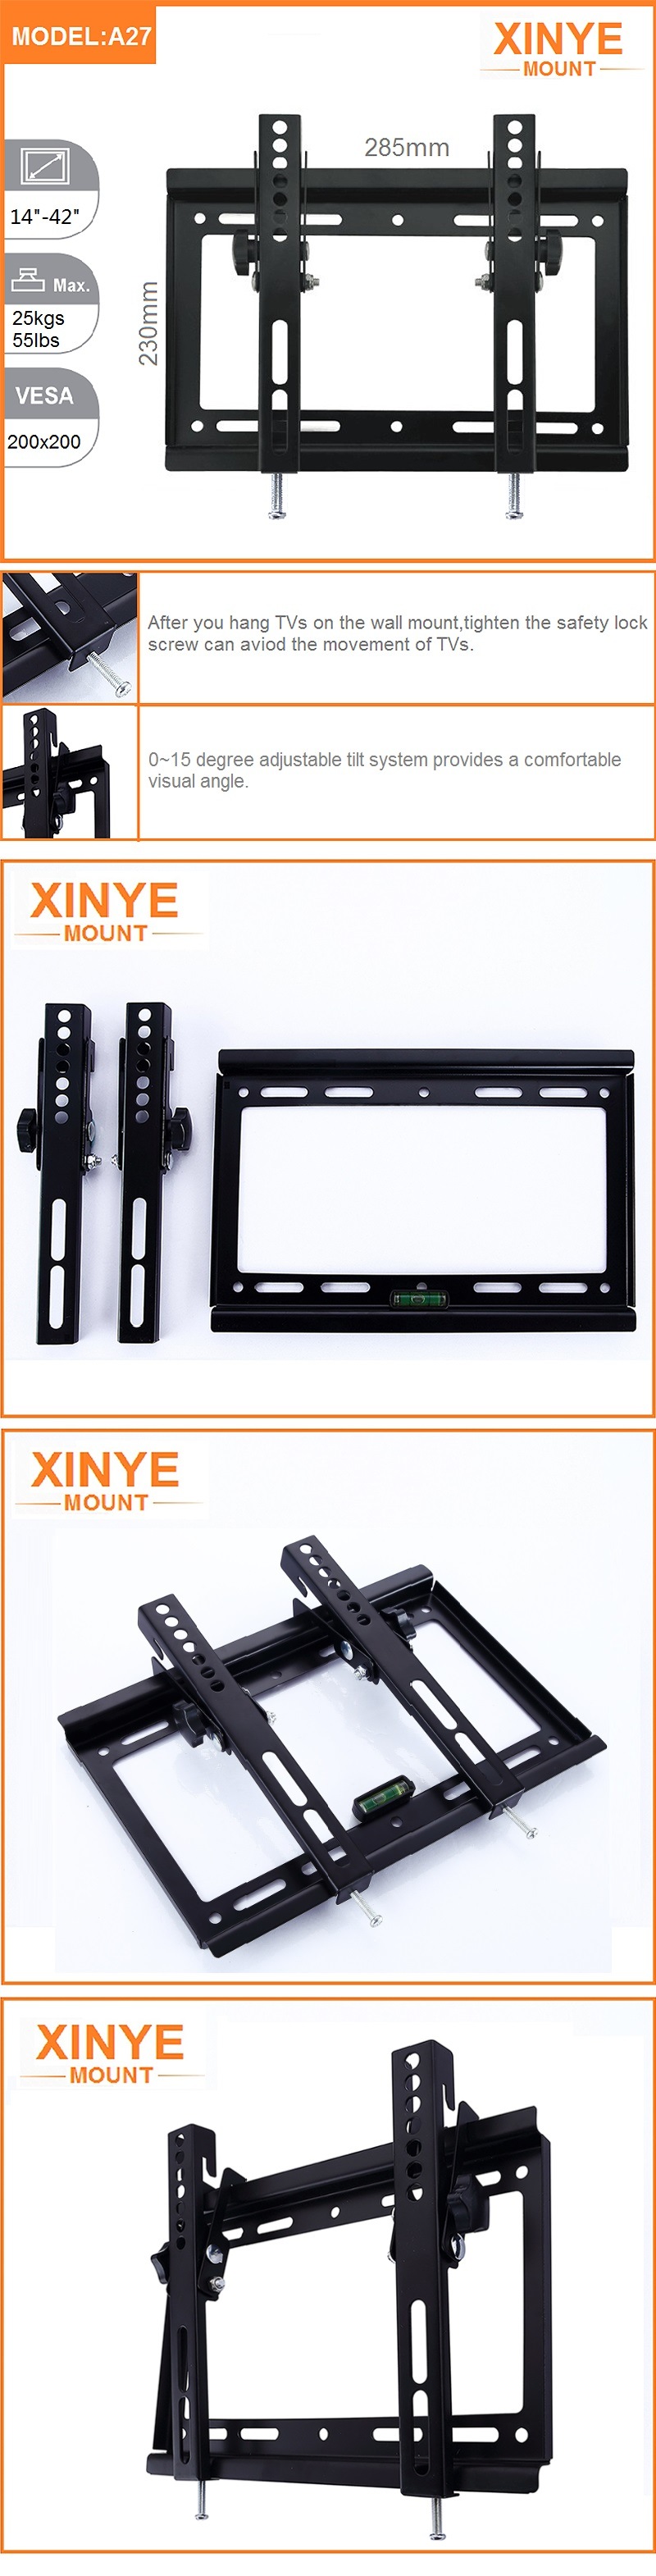 Hot Sell Adjustable TV Wall Mount Bracket for 14-42 Inch